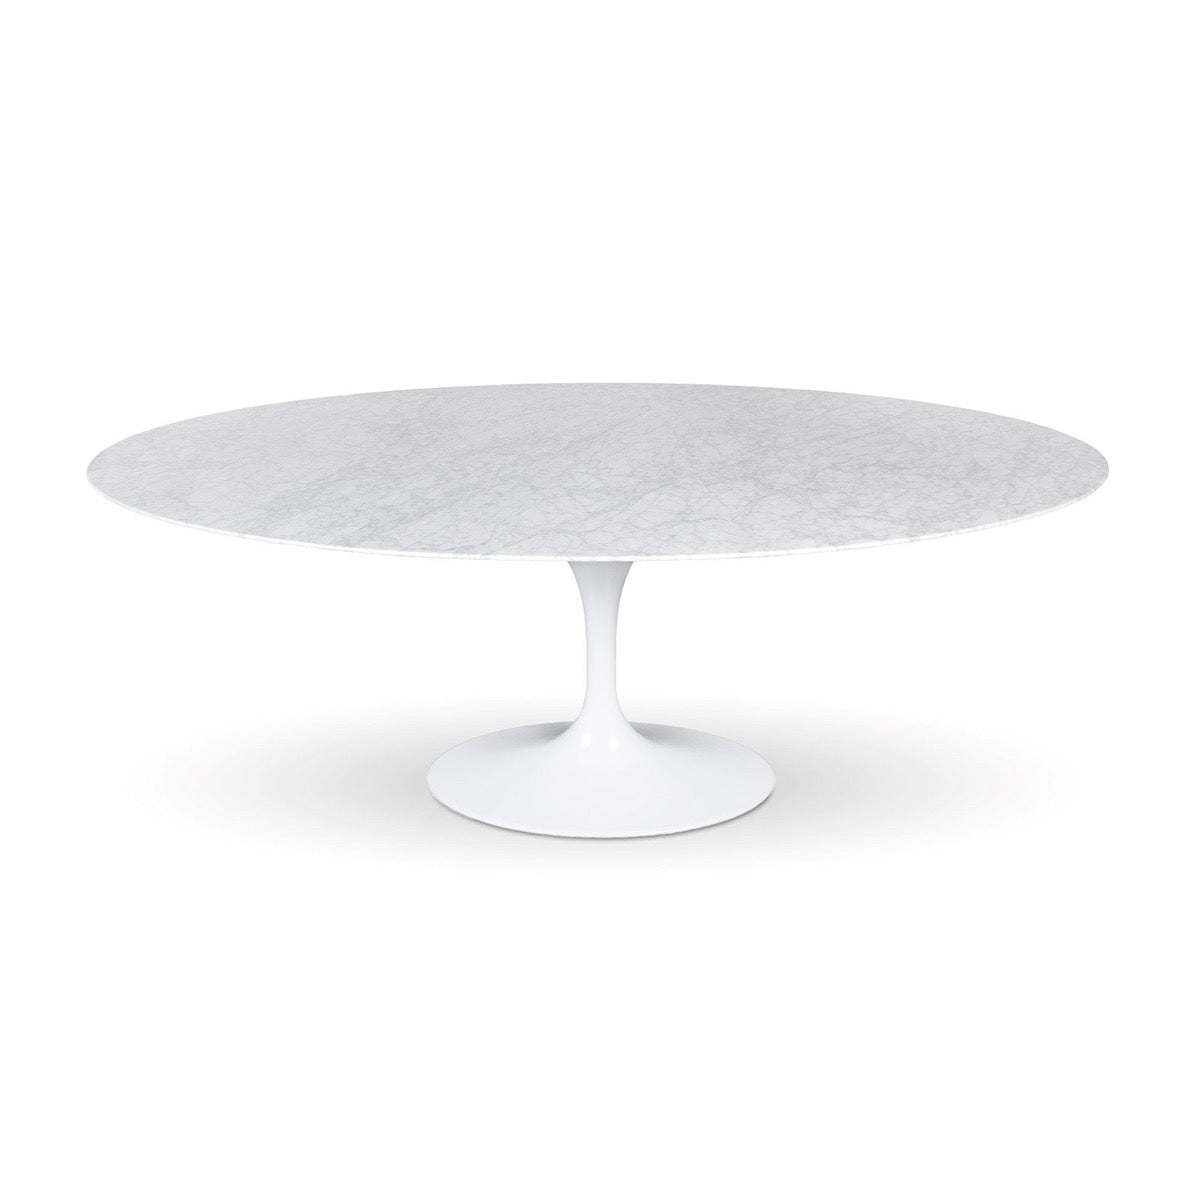 Trumpet Dining Table Oval with Marble Top - Small. Front view.